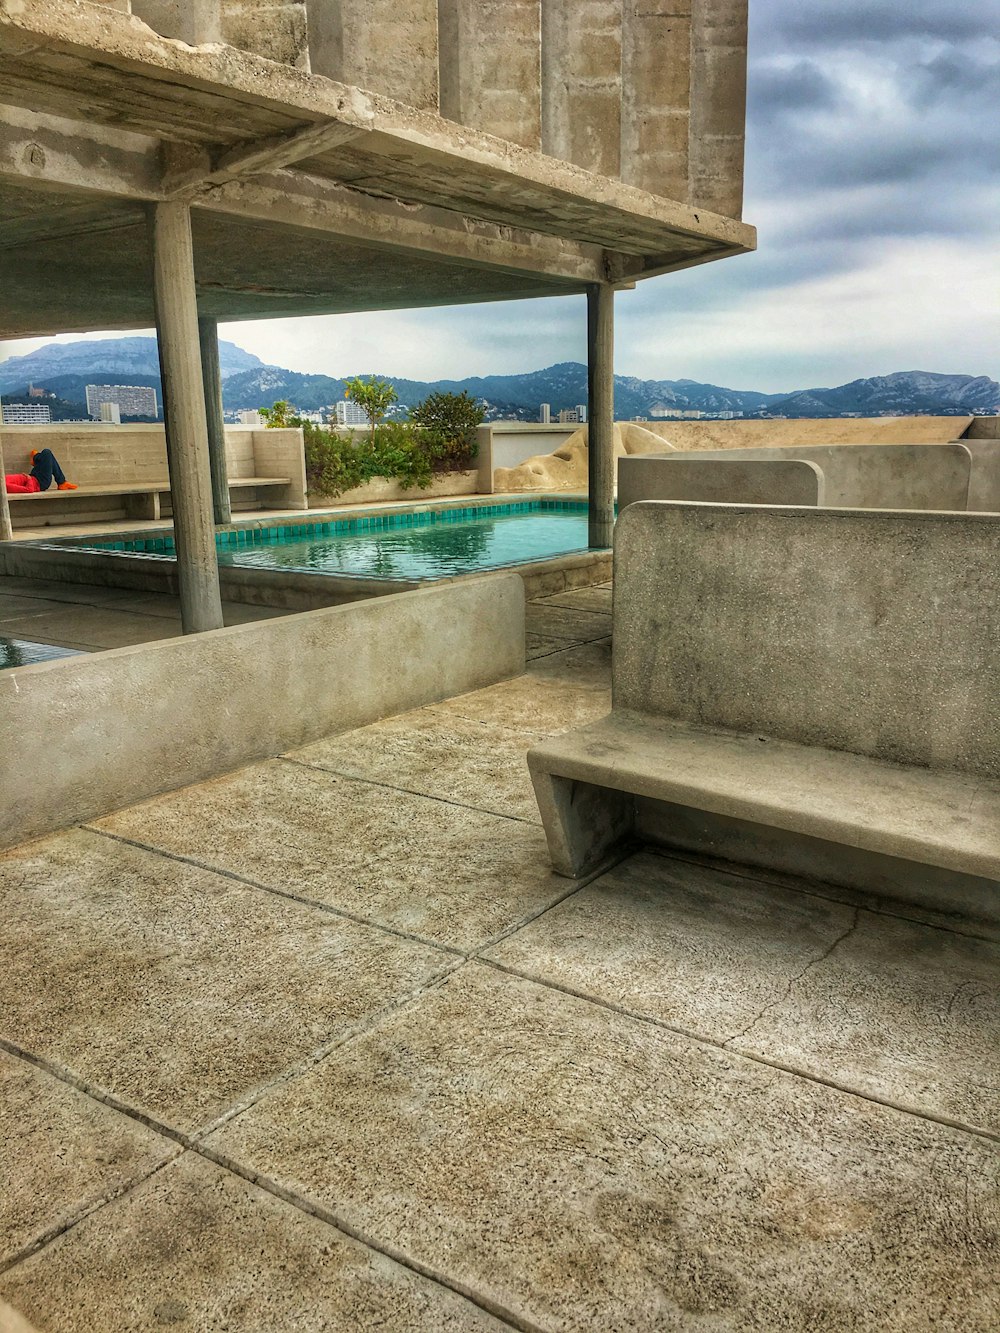 a concrete bench sitting next to a swimming pool